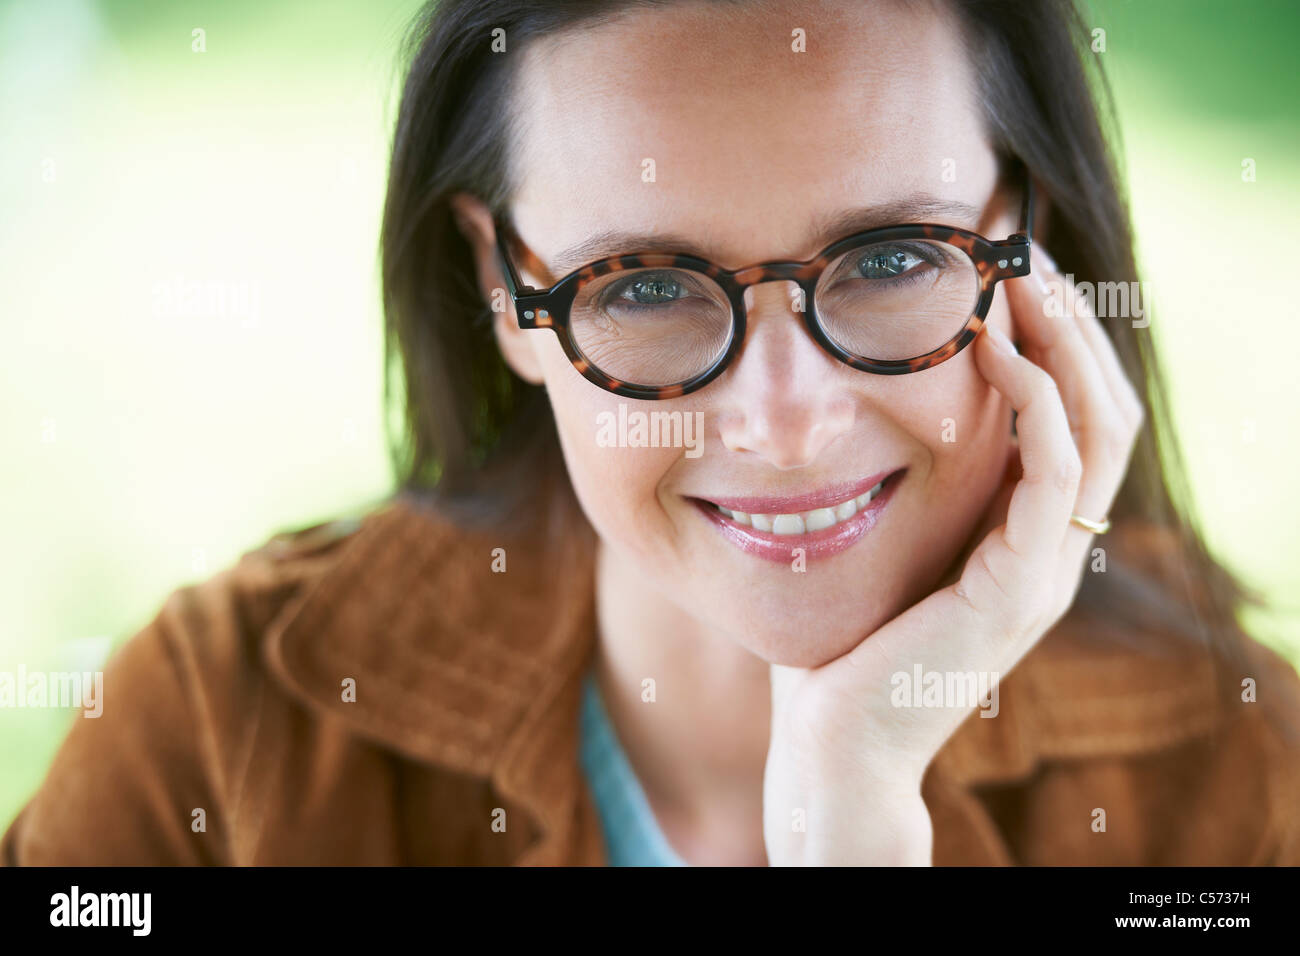 Smiling woman wearing eyeglasses Banque D'Images